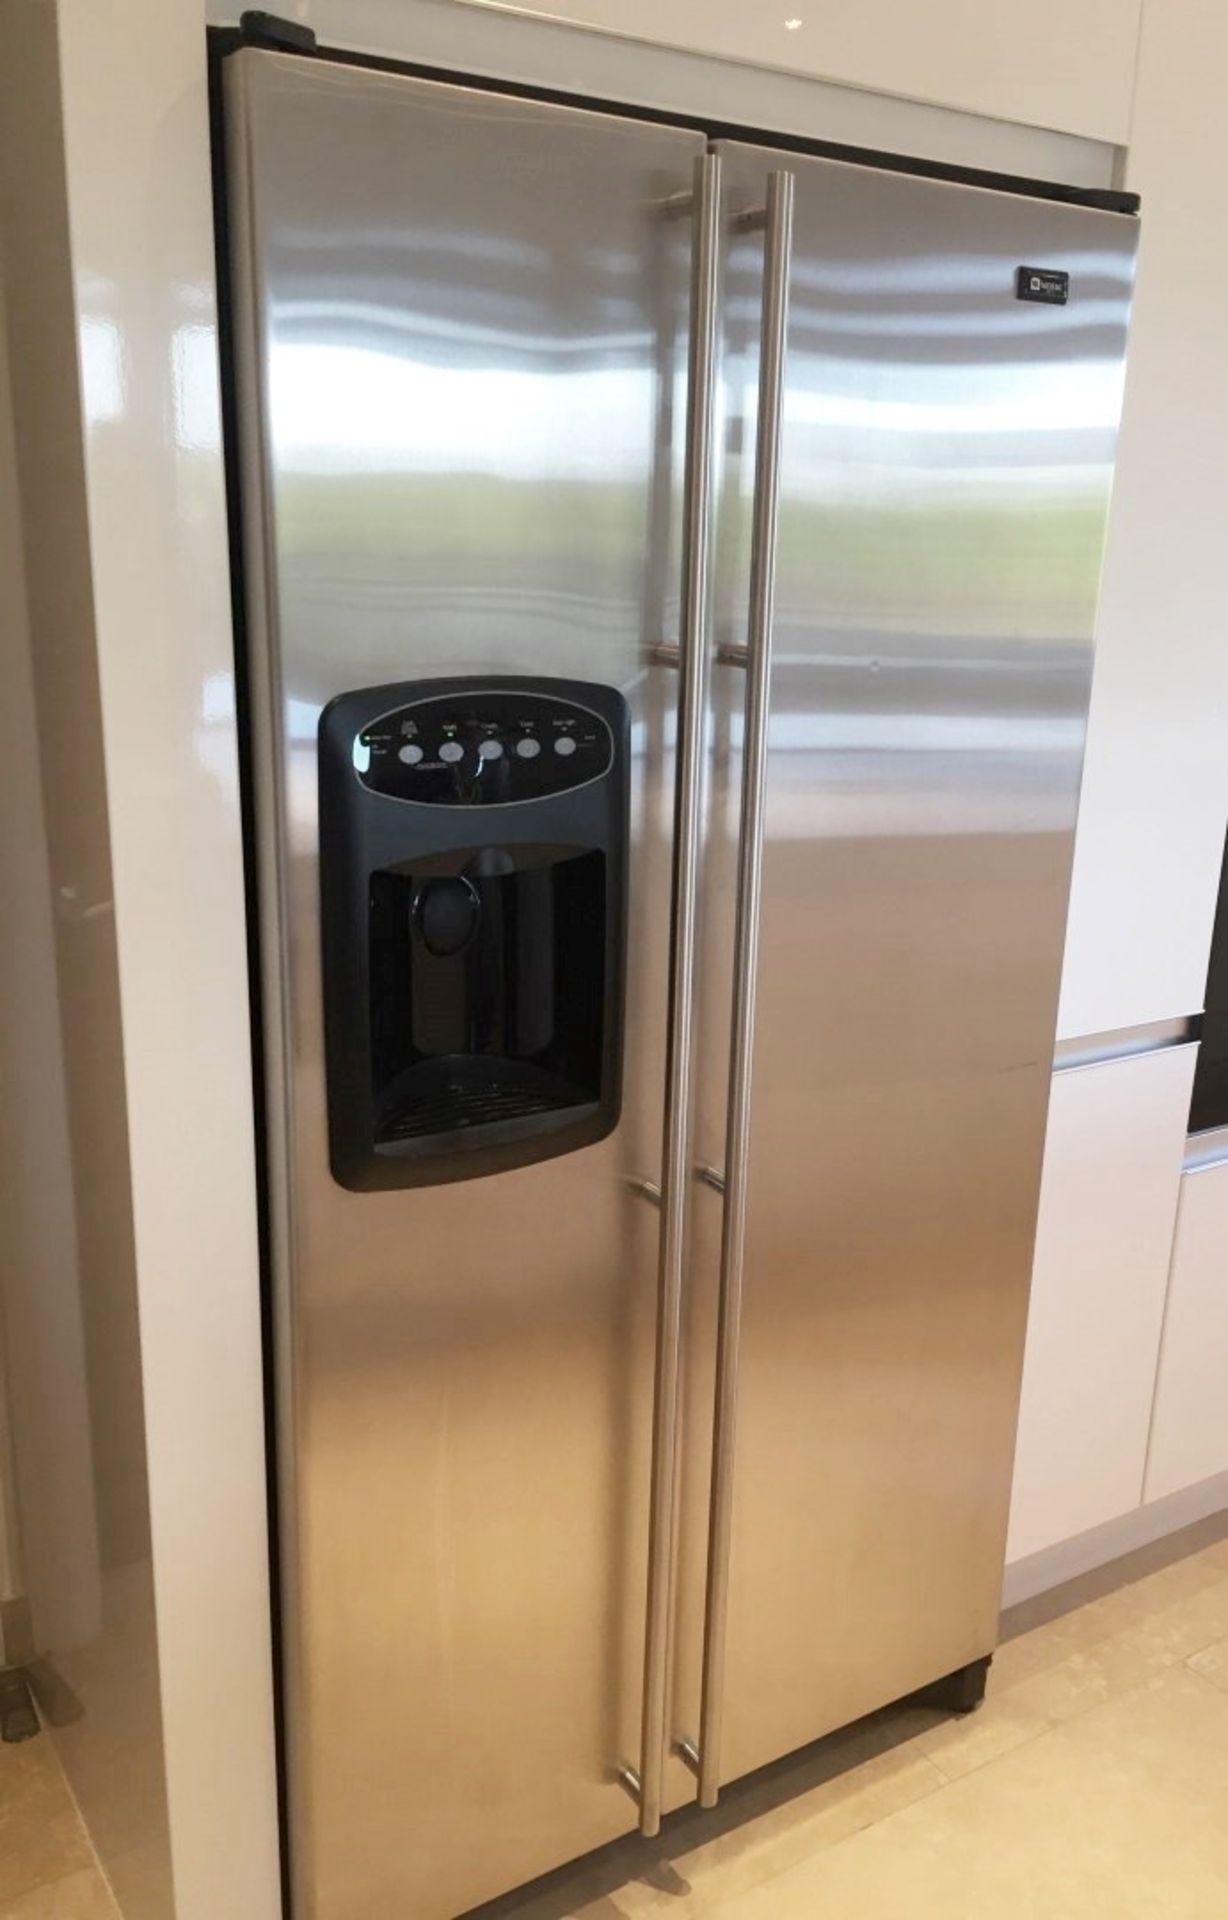 1 x Maytag Side by Side American Fridge Freezer with Ice & Water Dispenser (GC2225GEKS) -